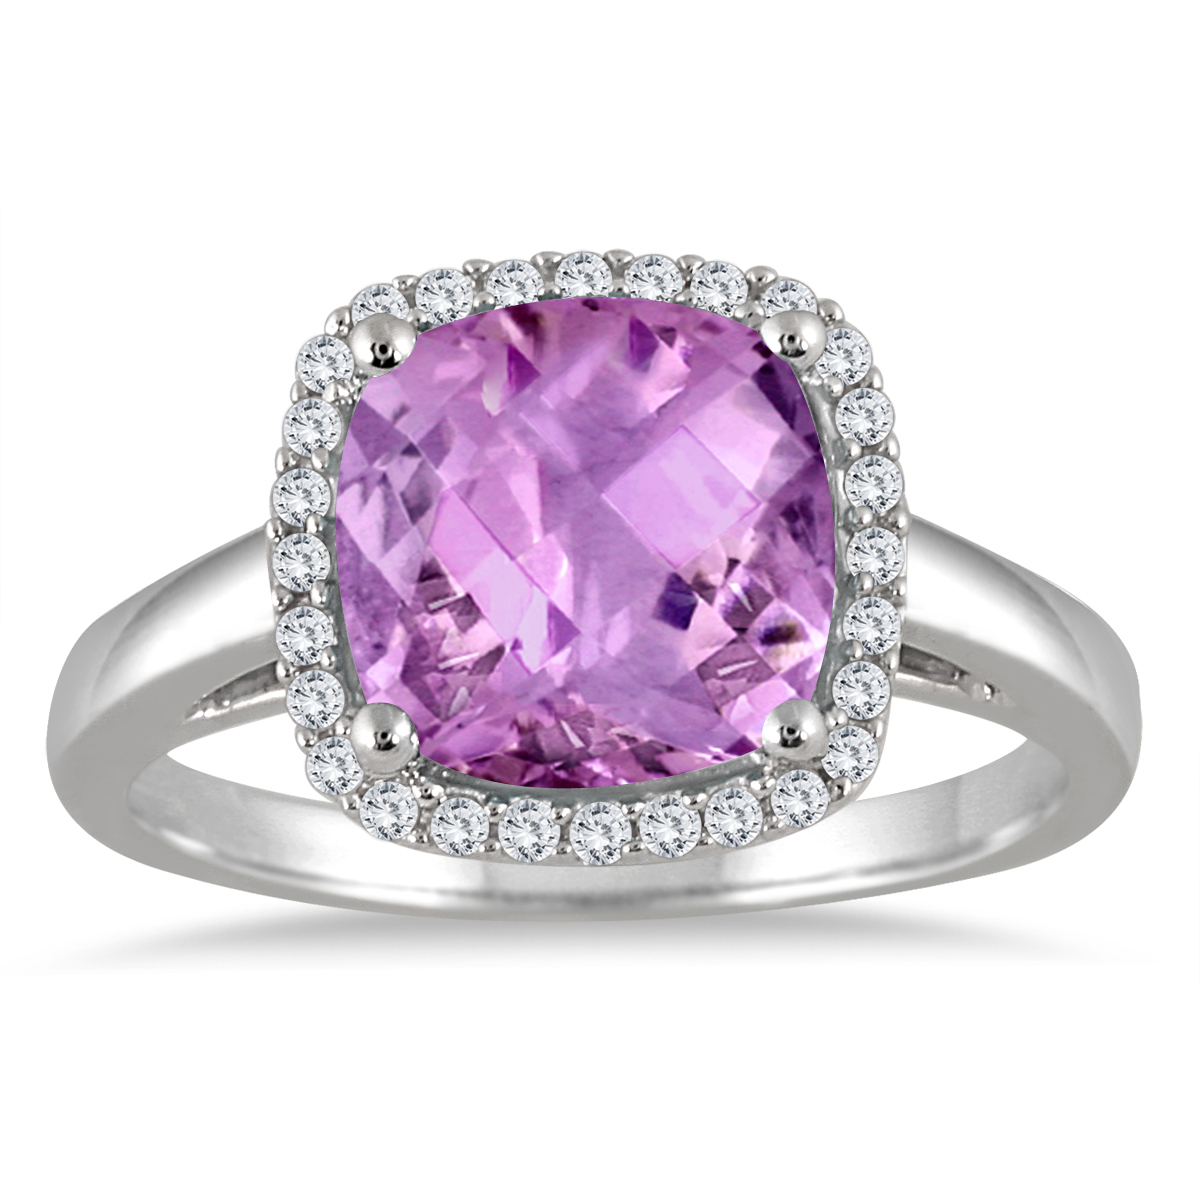 2.80 Carat Cushion Cut Amethyst and Diamond Halo Ring in 10K White Gold